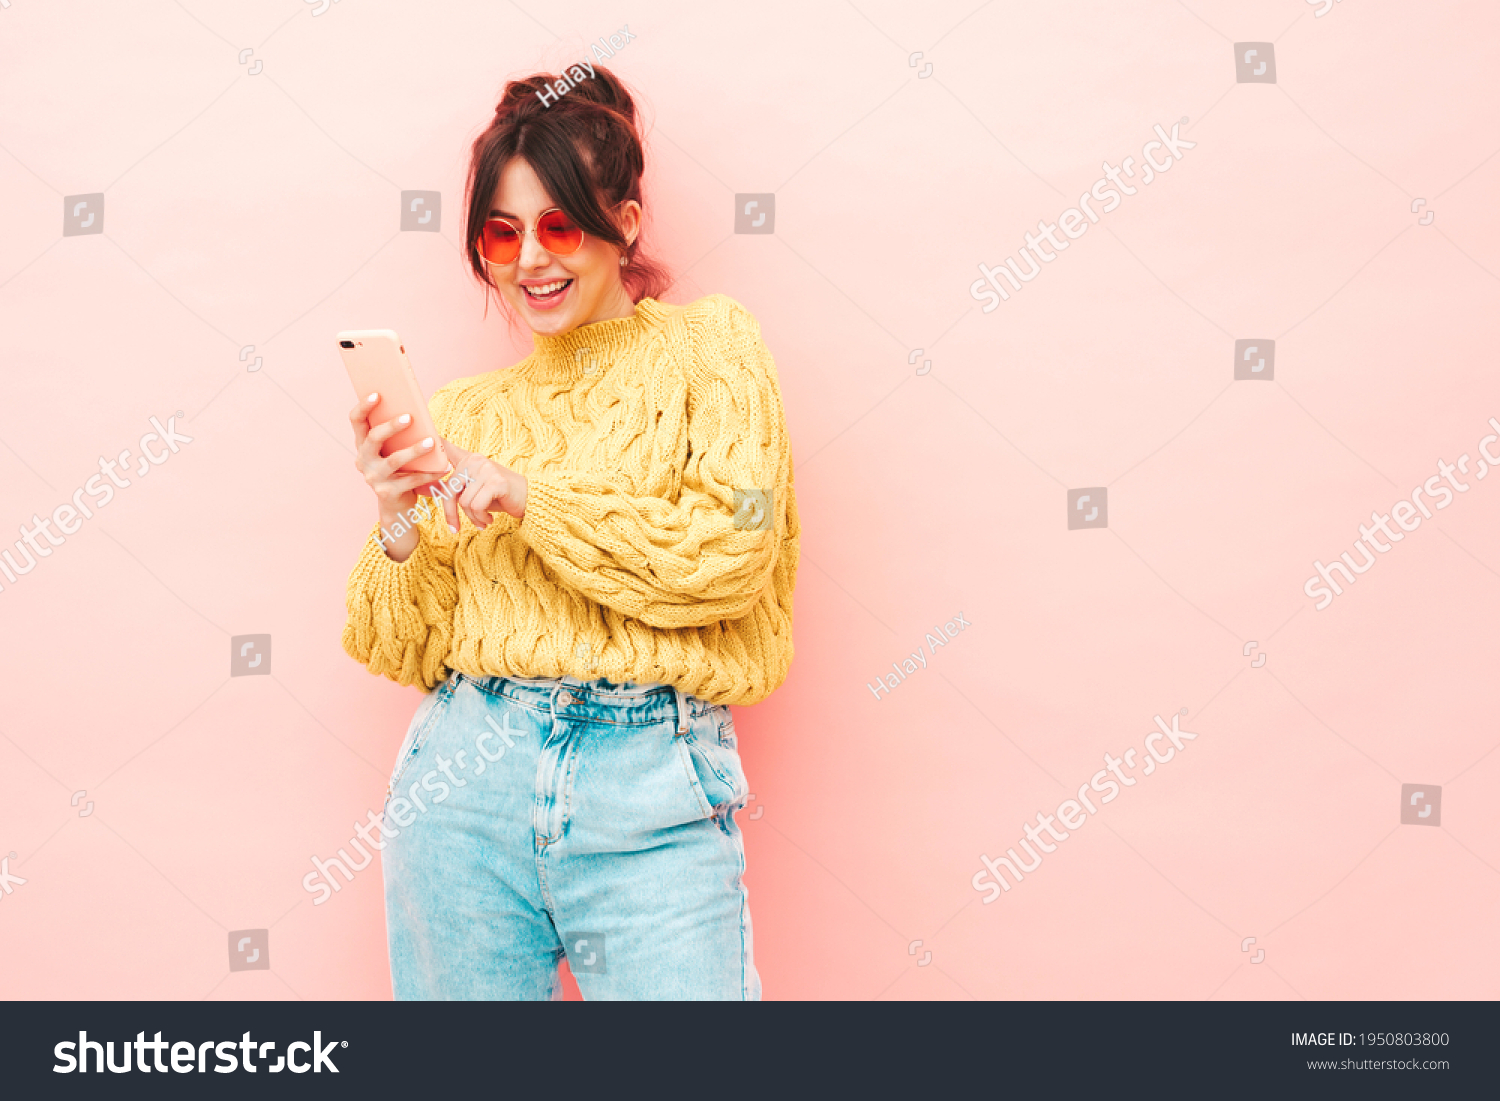 Young beautiful smiling female in trendy summer yellow hipster sweater and jeans.Sexy carefree woman posing near pink wall in studio.Positive model having fun. Looking at smartphone screen, using app #1950803800